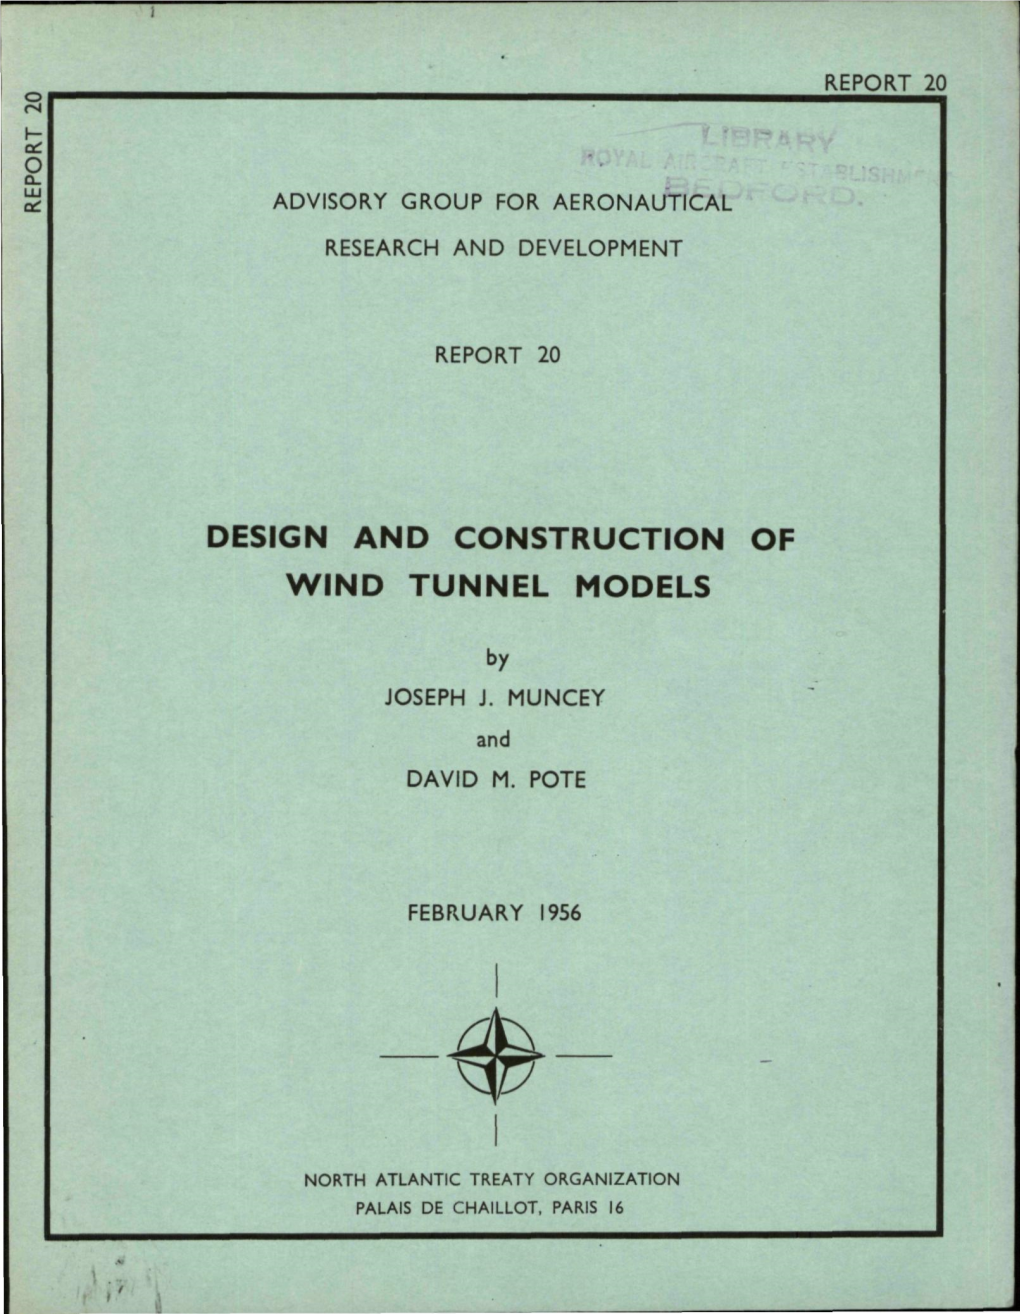 Design and Construction of Wind Tunnel Models